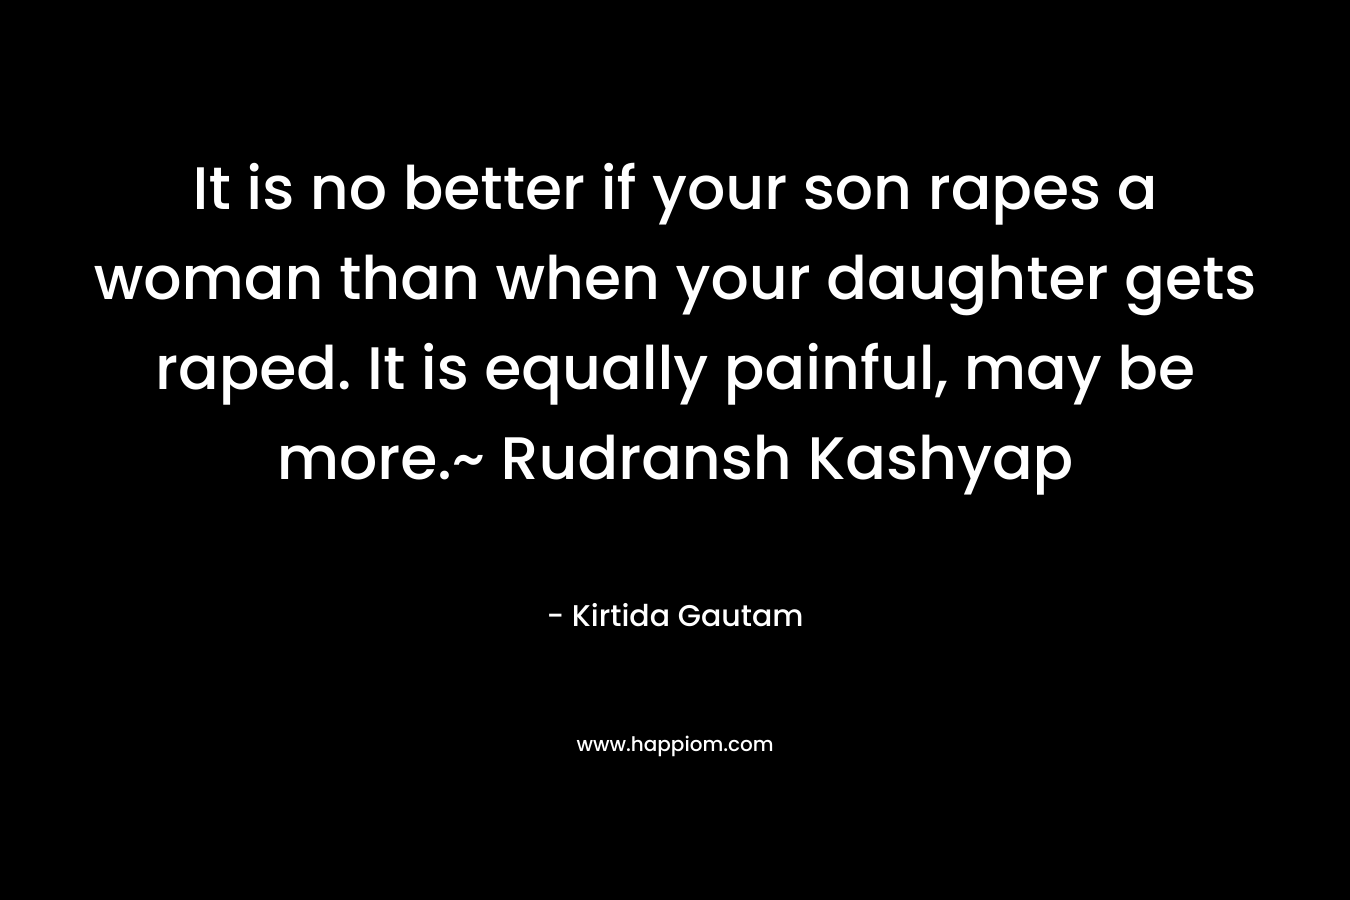 It is no better if your son rapes a woman than when your daughter gets raped. It is equally painful, may be more.~ Rudransh Kashyap